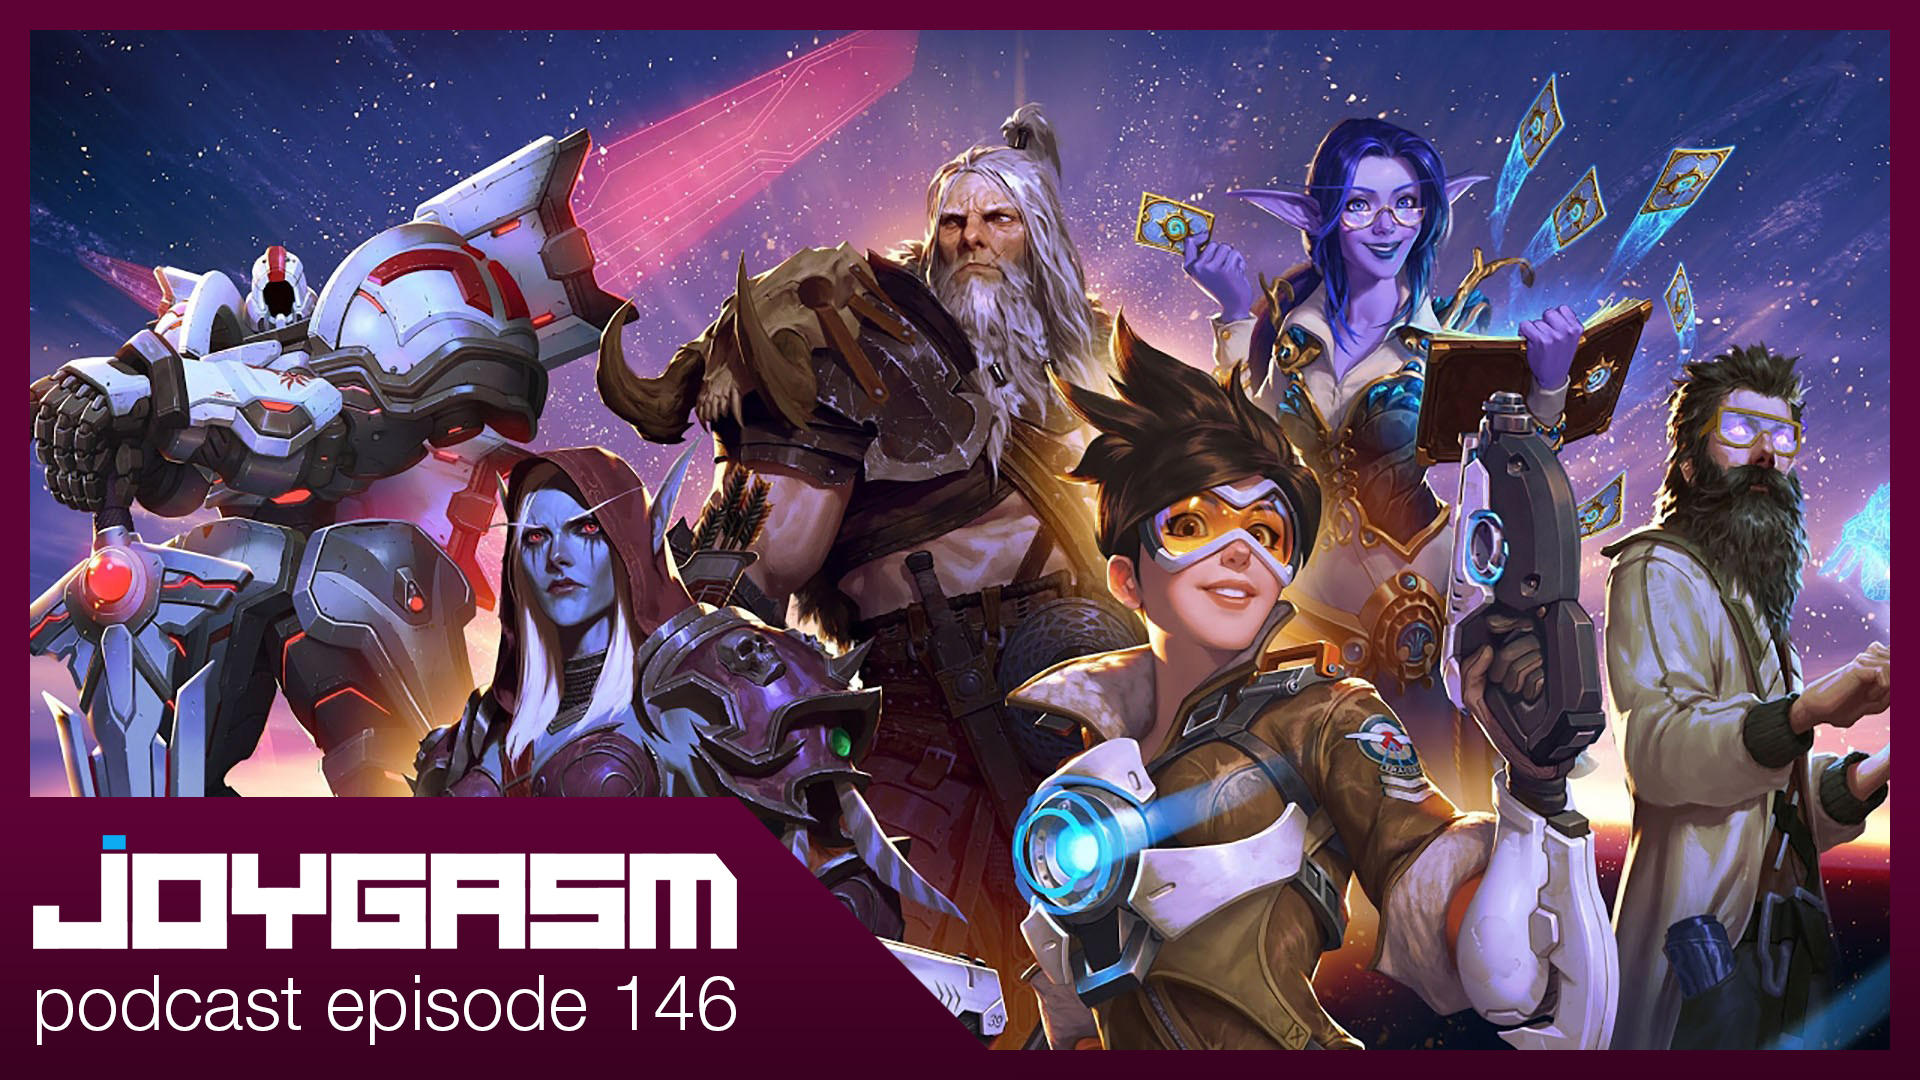 Ep. 146: Blizzcon 2019, Overwatch 2, Diablo 4, World Of Warcraft Shadowkeep, & More